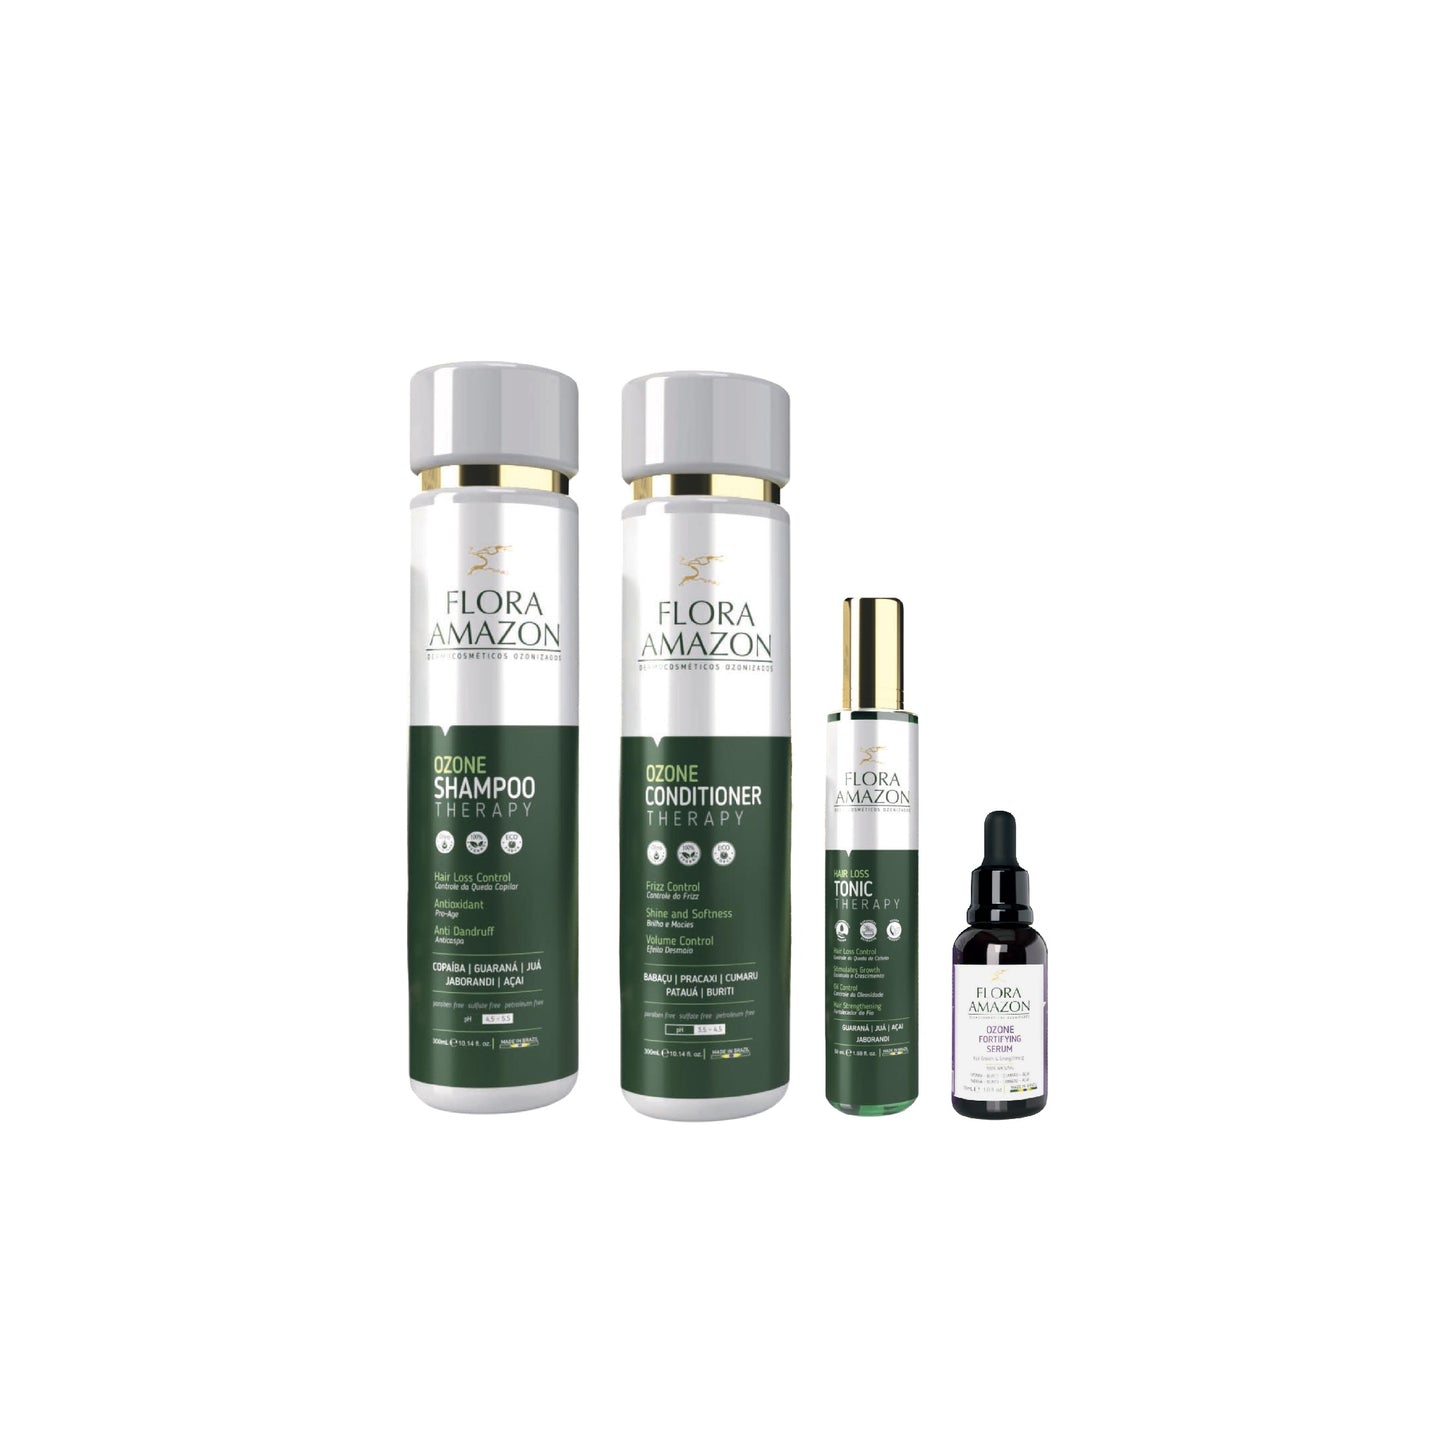 flora's bundle for hair loss and thinning with shampoo, conditioner, hair loss tonic, and fortifying serum.